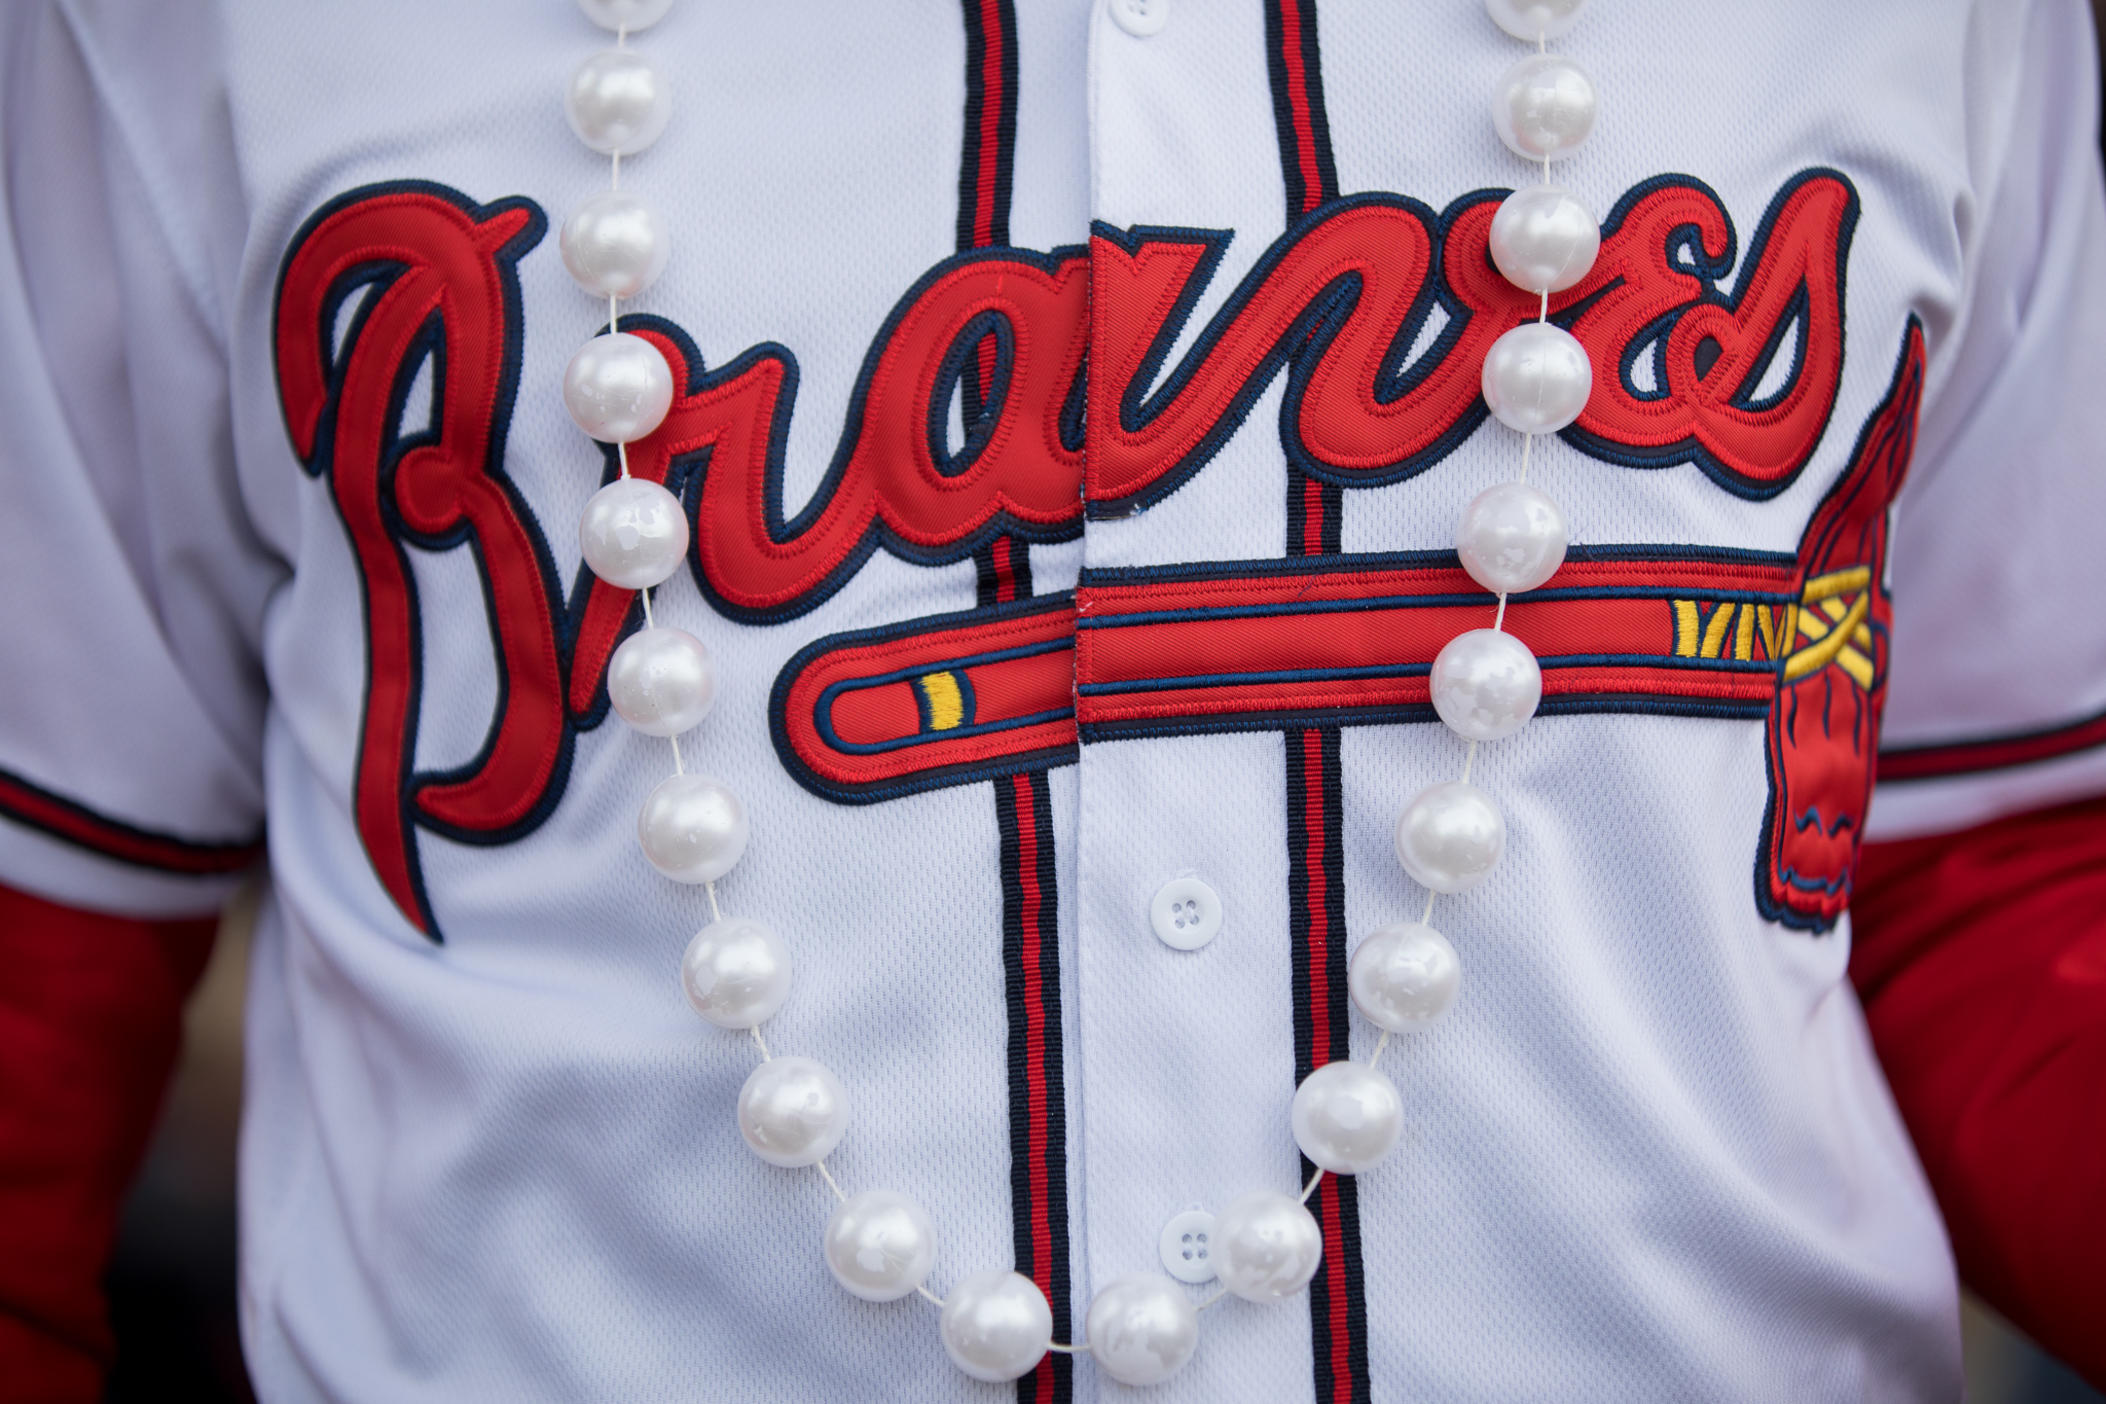 Braves sign new 1B Olson to $168 million, 8-year contract